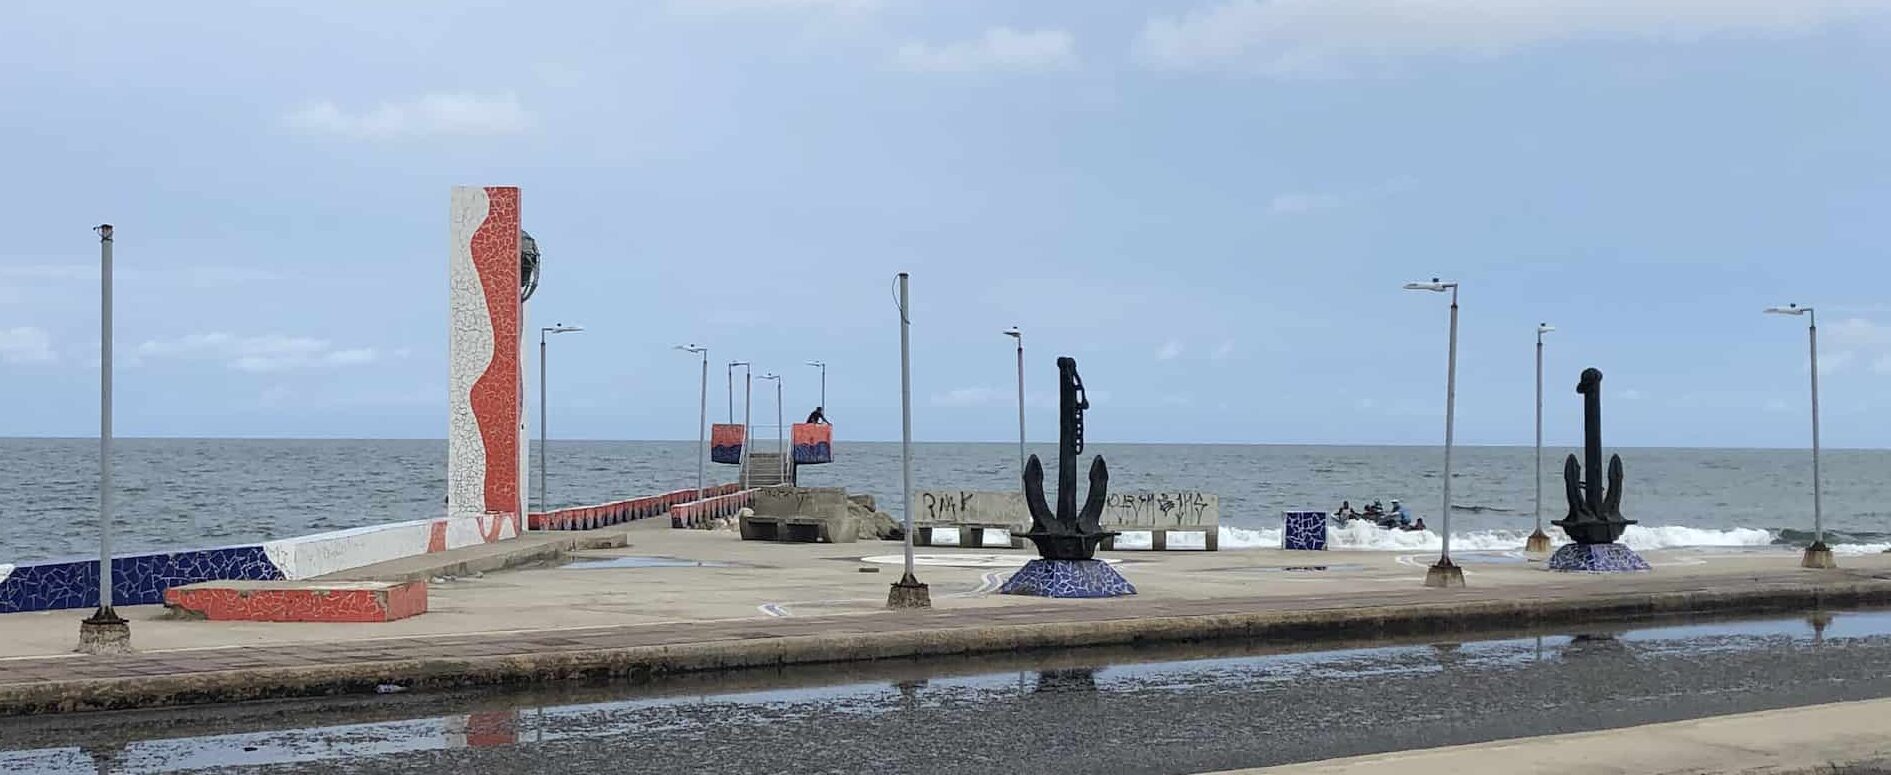 Union of the Oceans Monument